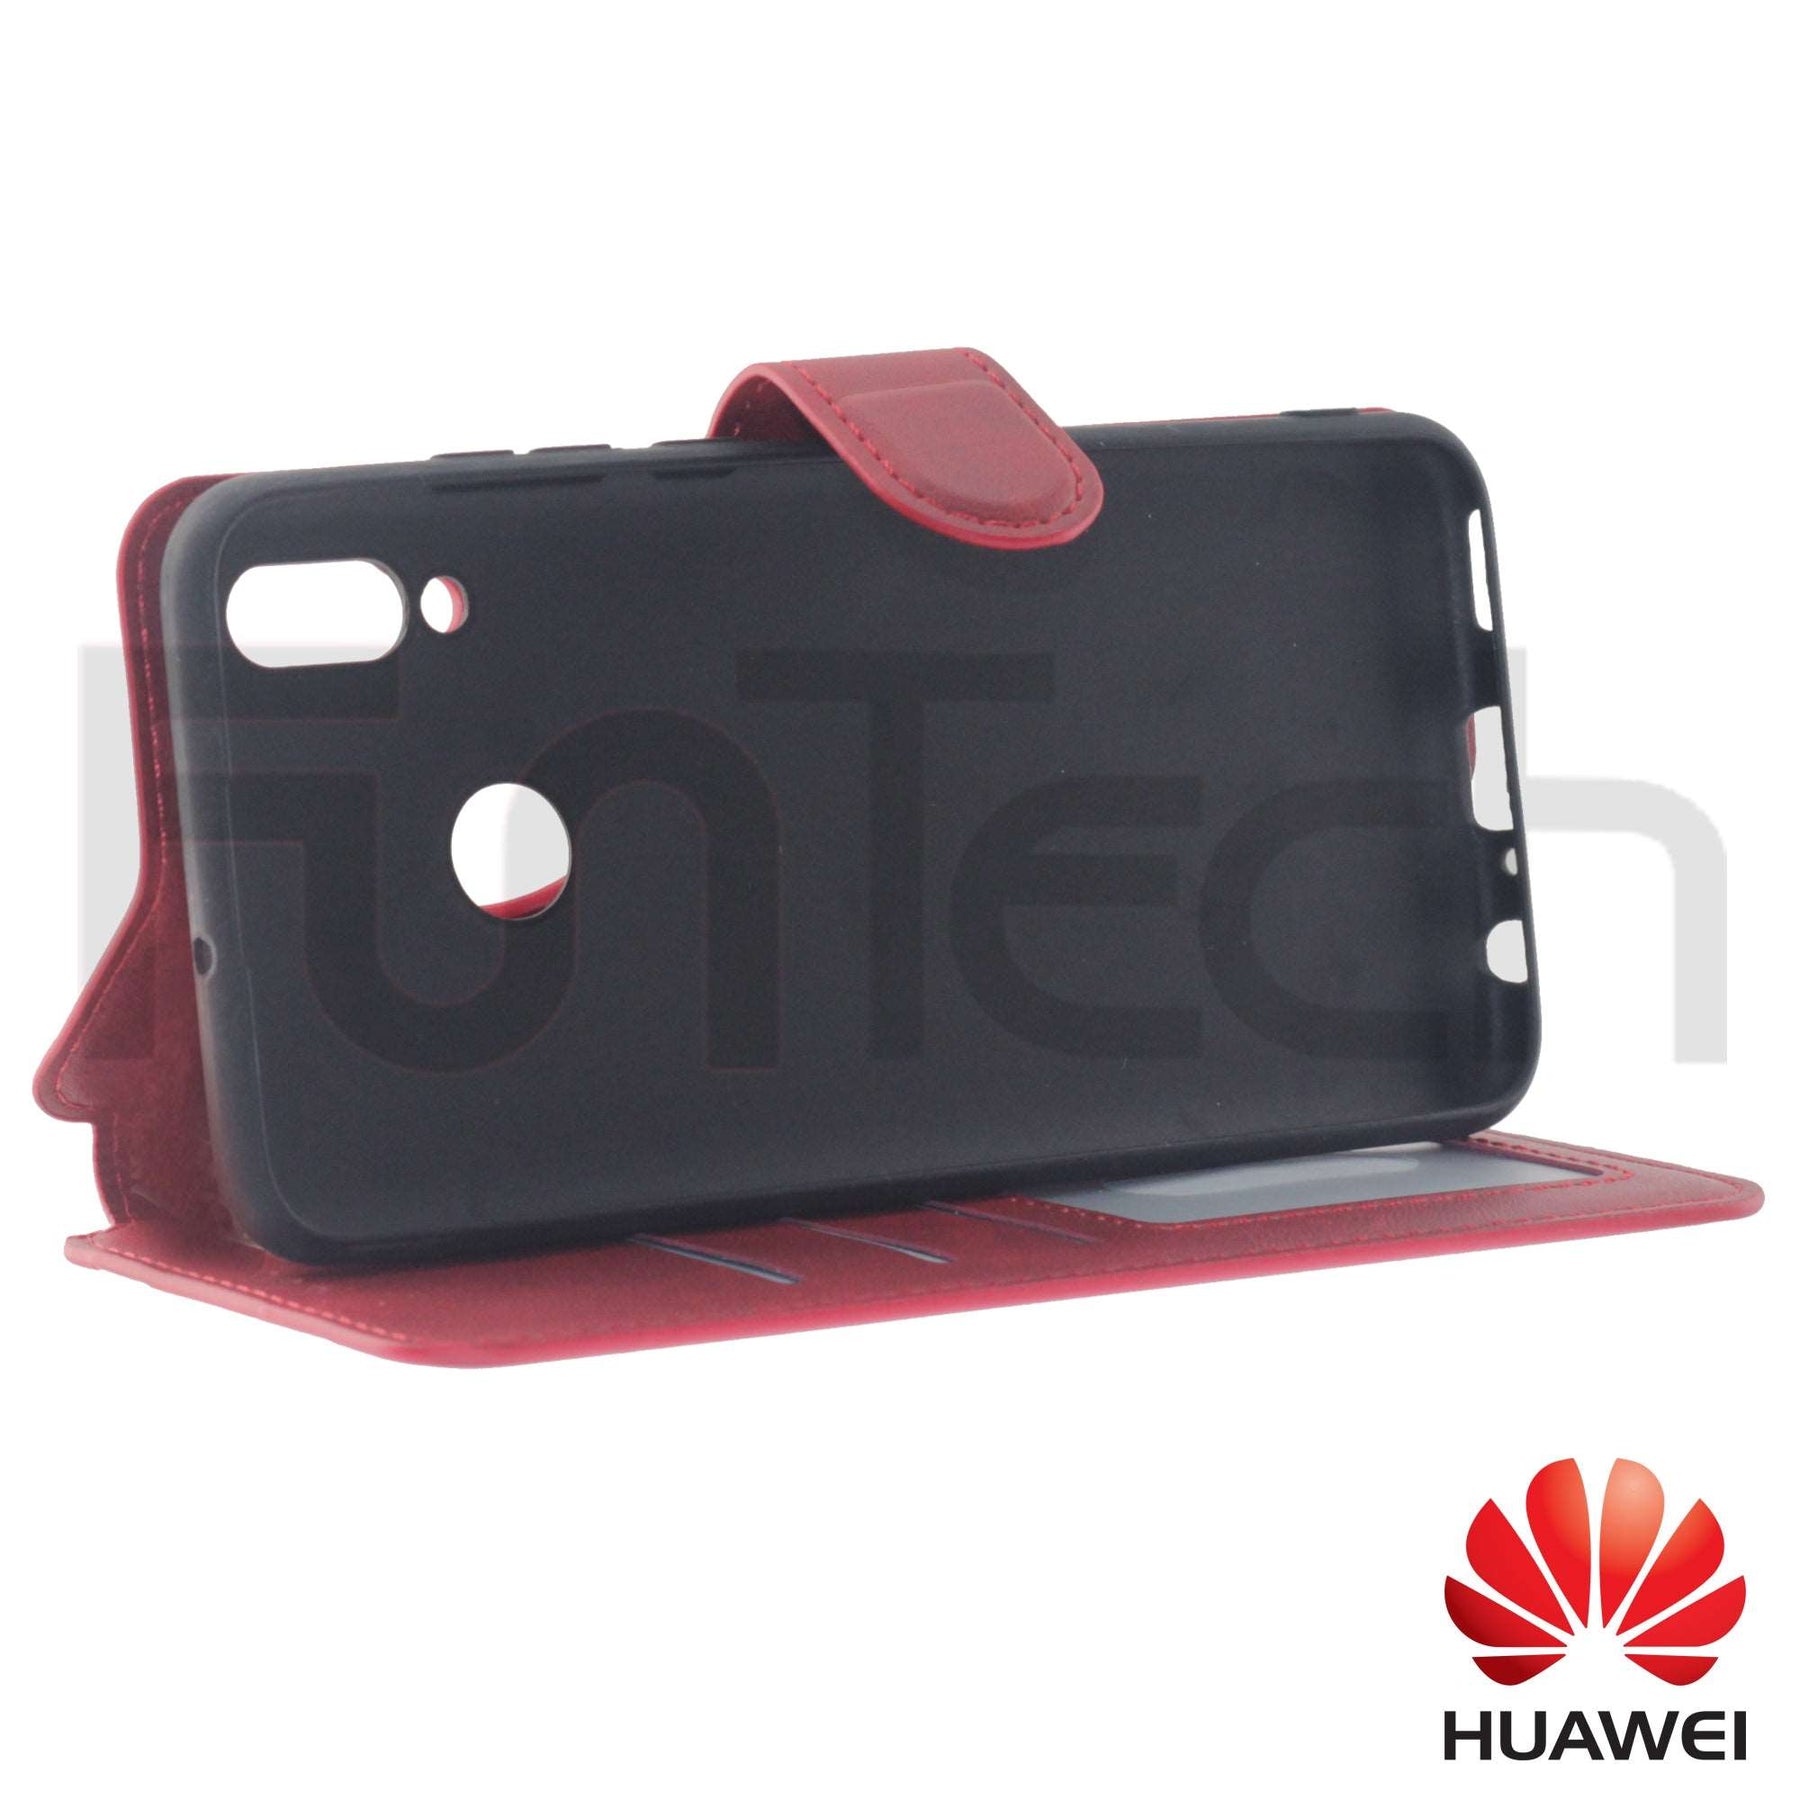 Huawei, P Smart 2019, Leather Wallet Case, Color Red.